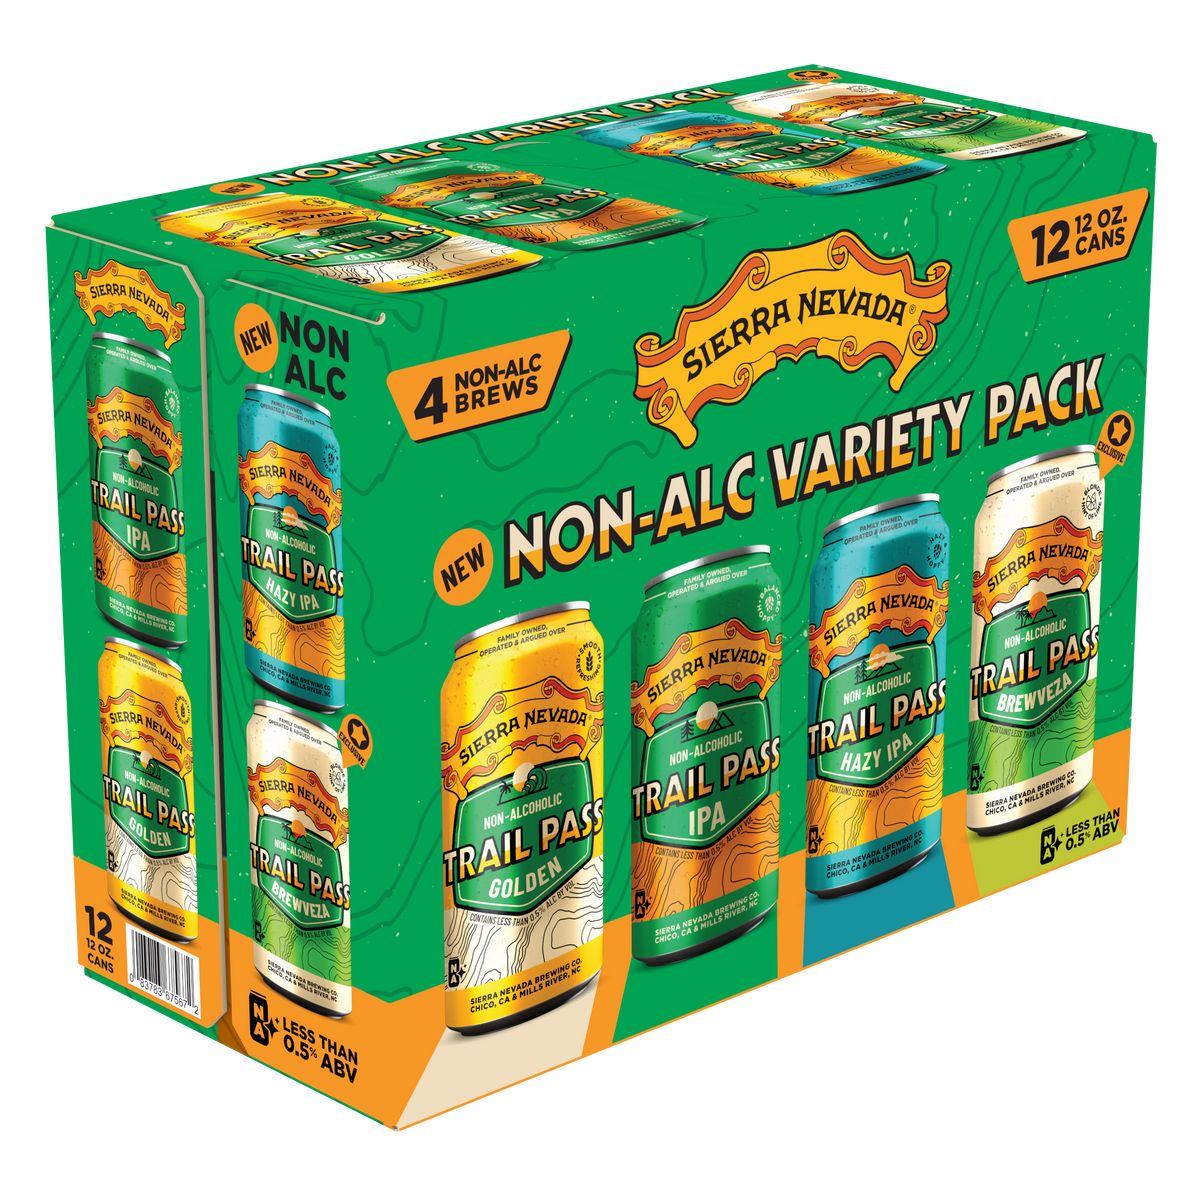 Sierra Nevada Brewing Co. 12-Pack Trail Pass Variety Pack - angled view